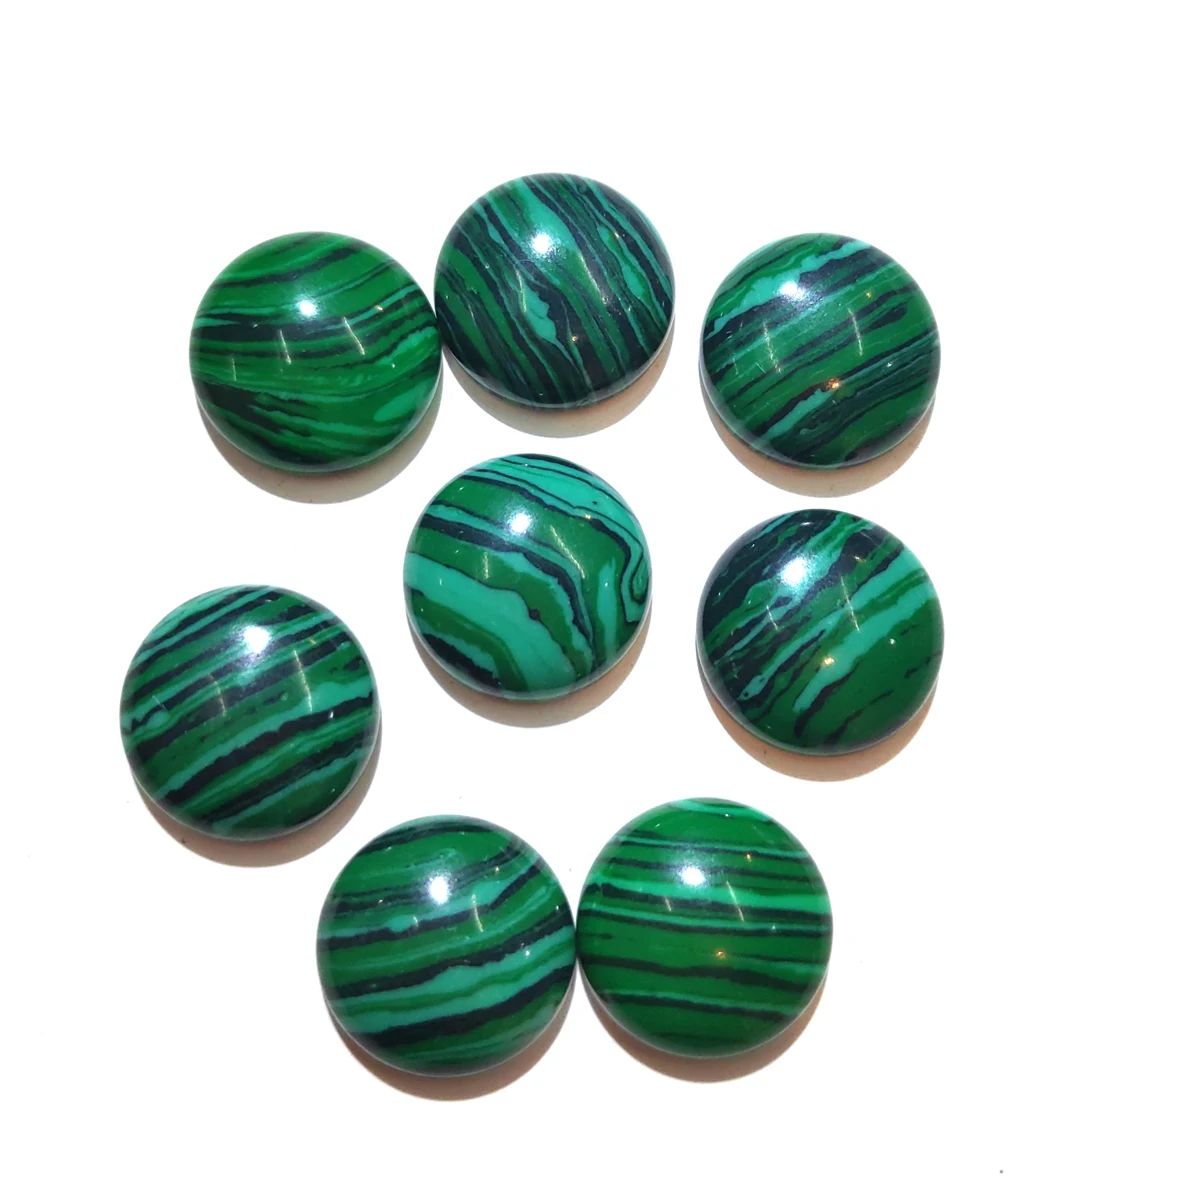 

10 PCS Malachite Natural Stones Cabochon 12mm 14mm 16mm 18mm 20mm Round No Hole For Making Jewelry DIY